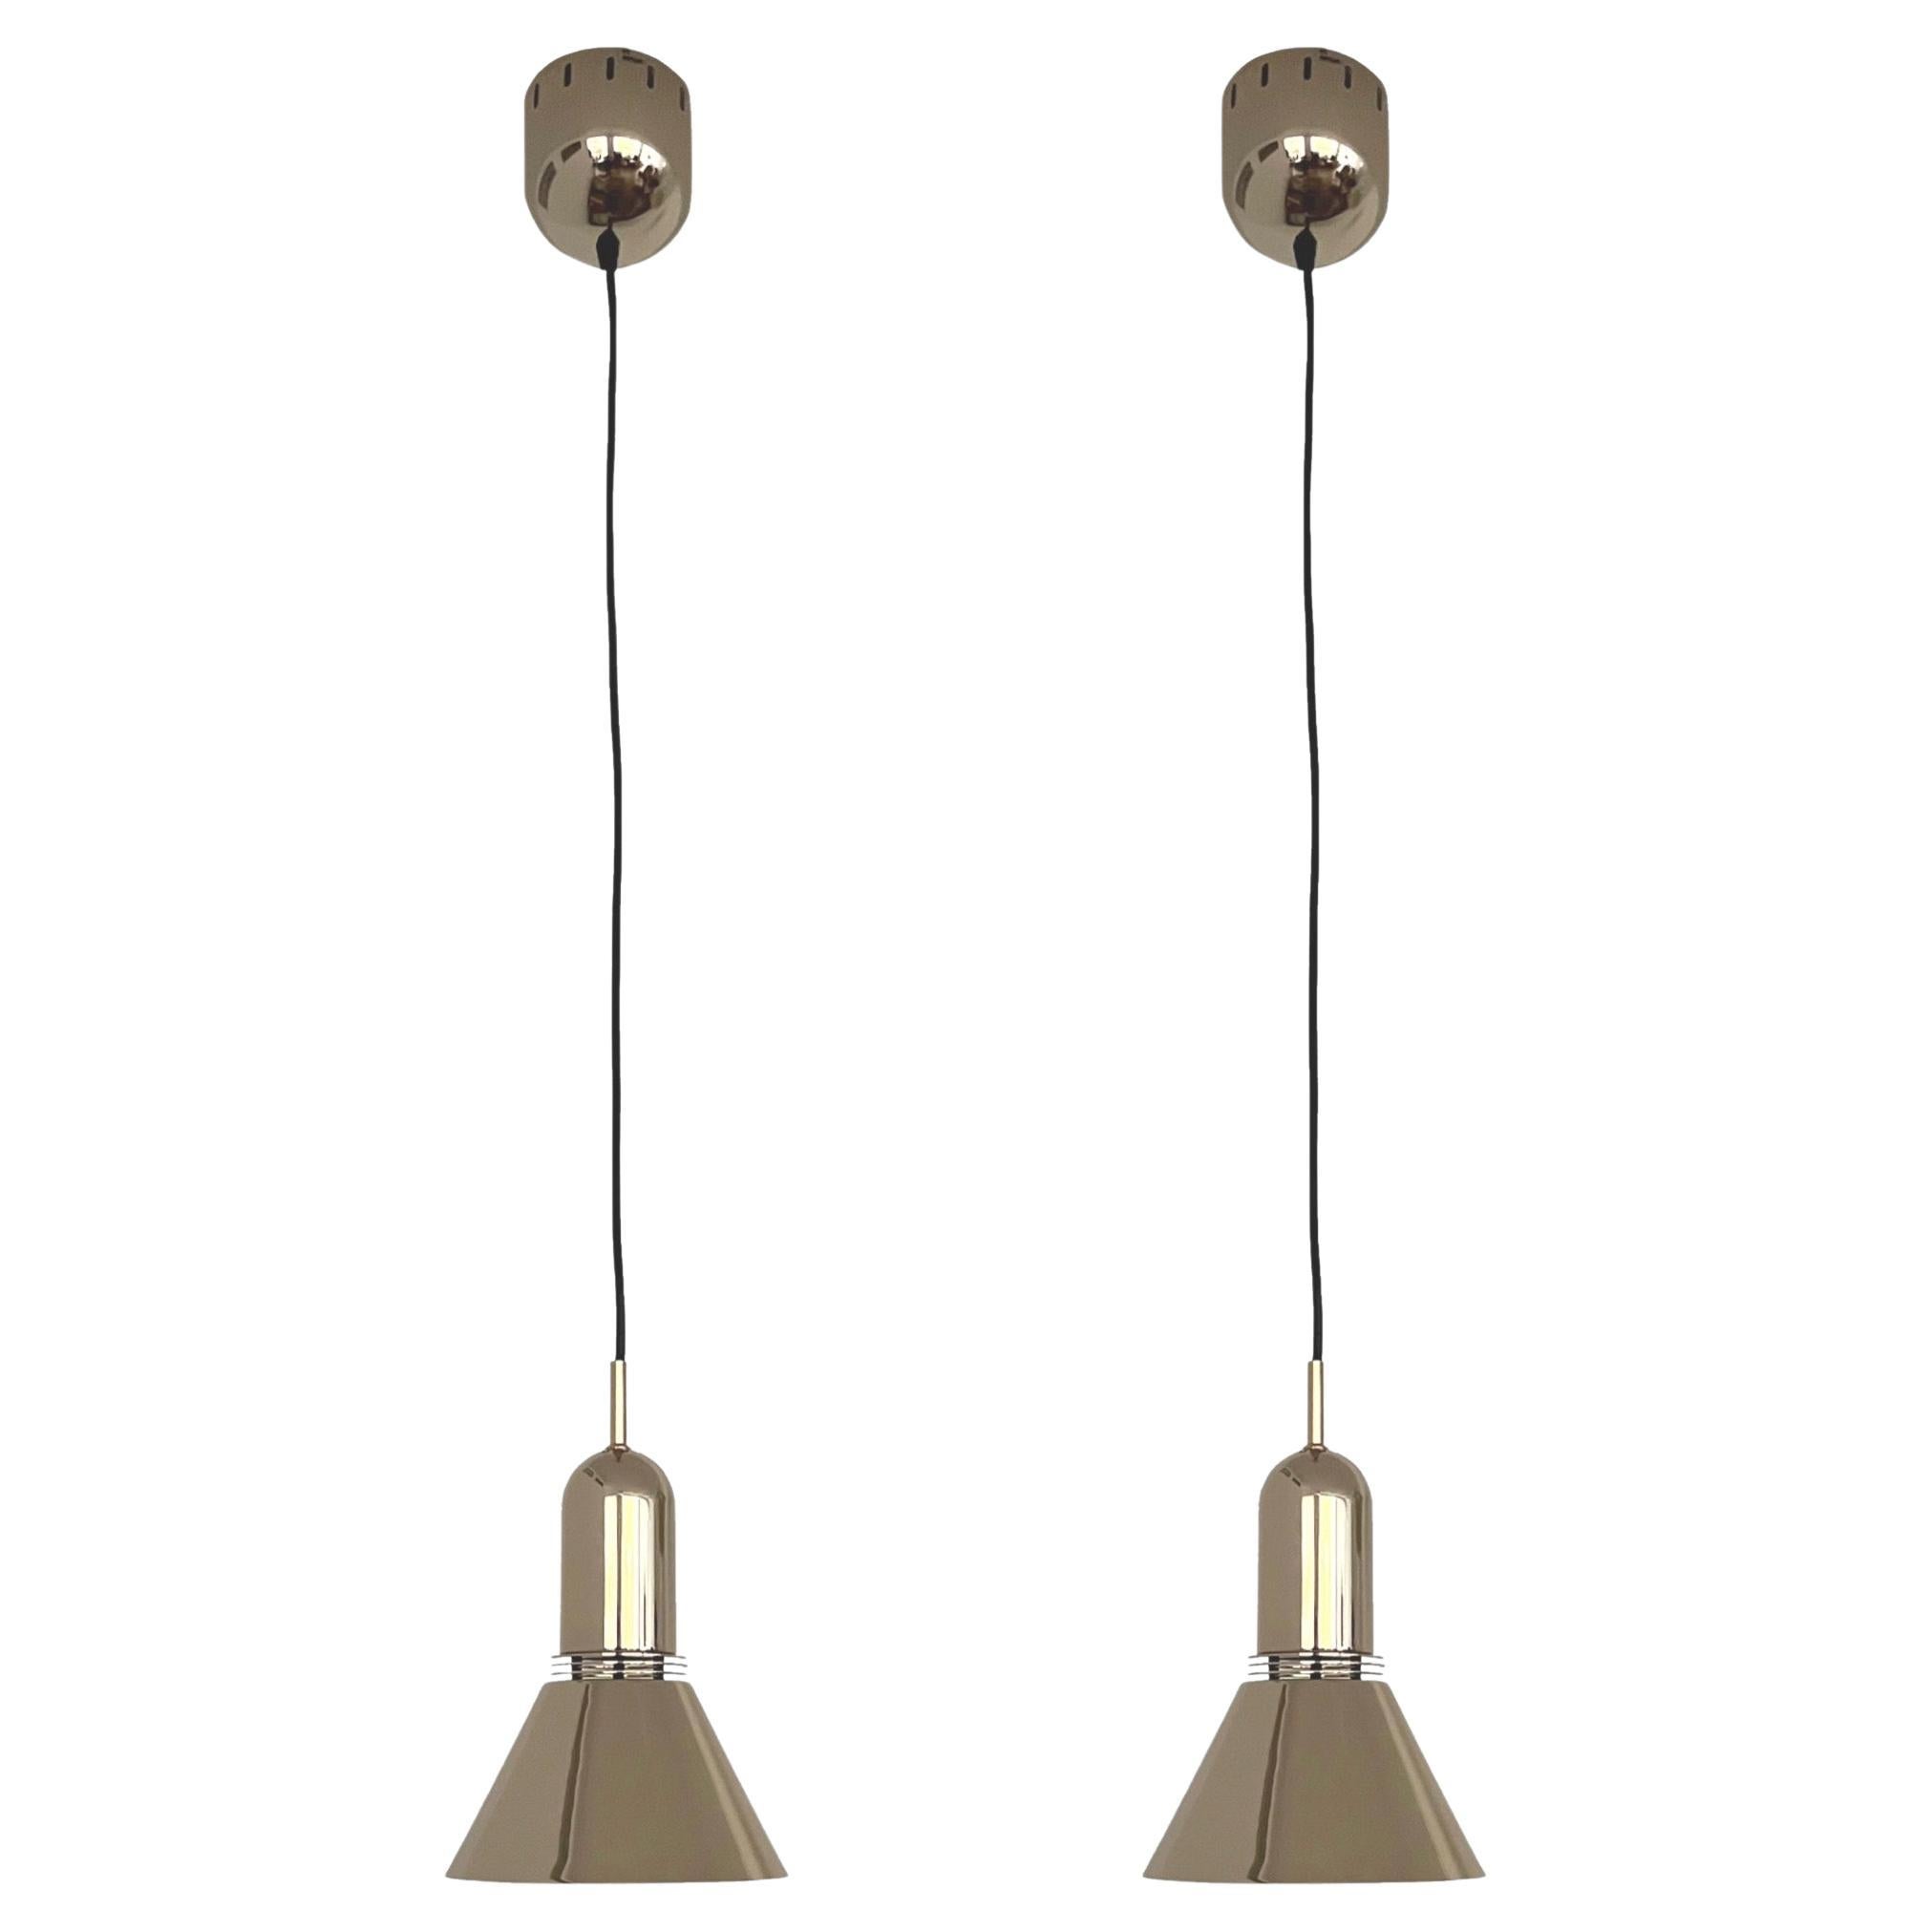 Midcentury Pair of Gold Metal Chandeliers by Marelli for Estiluz, 1970s For Sale